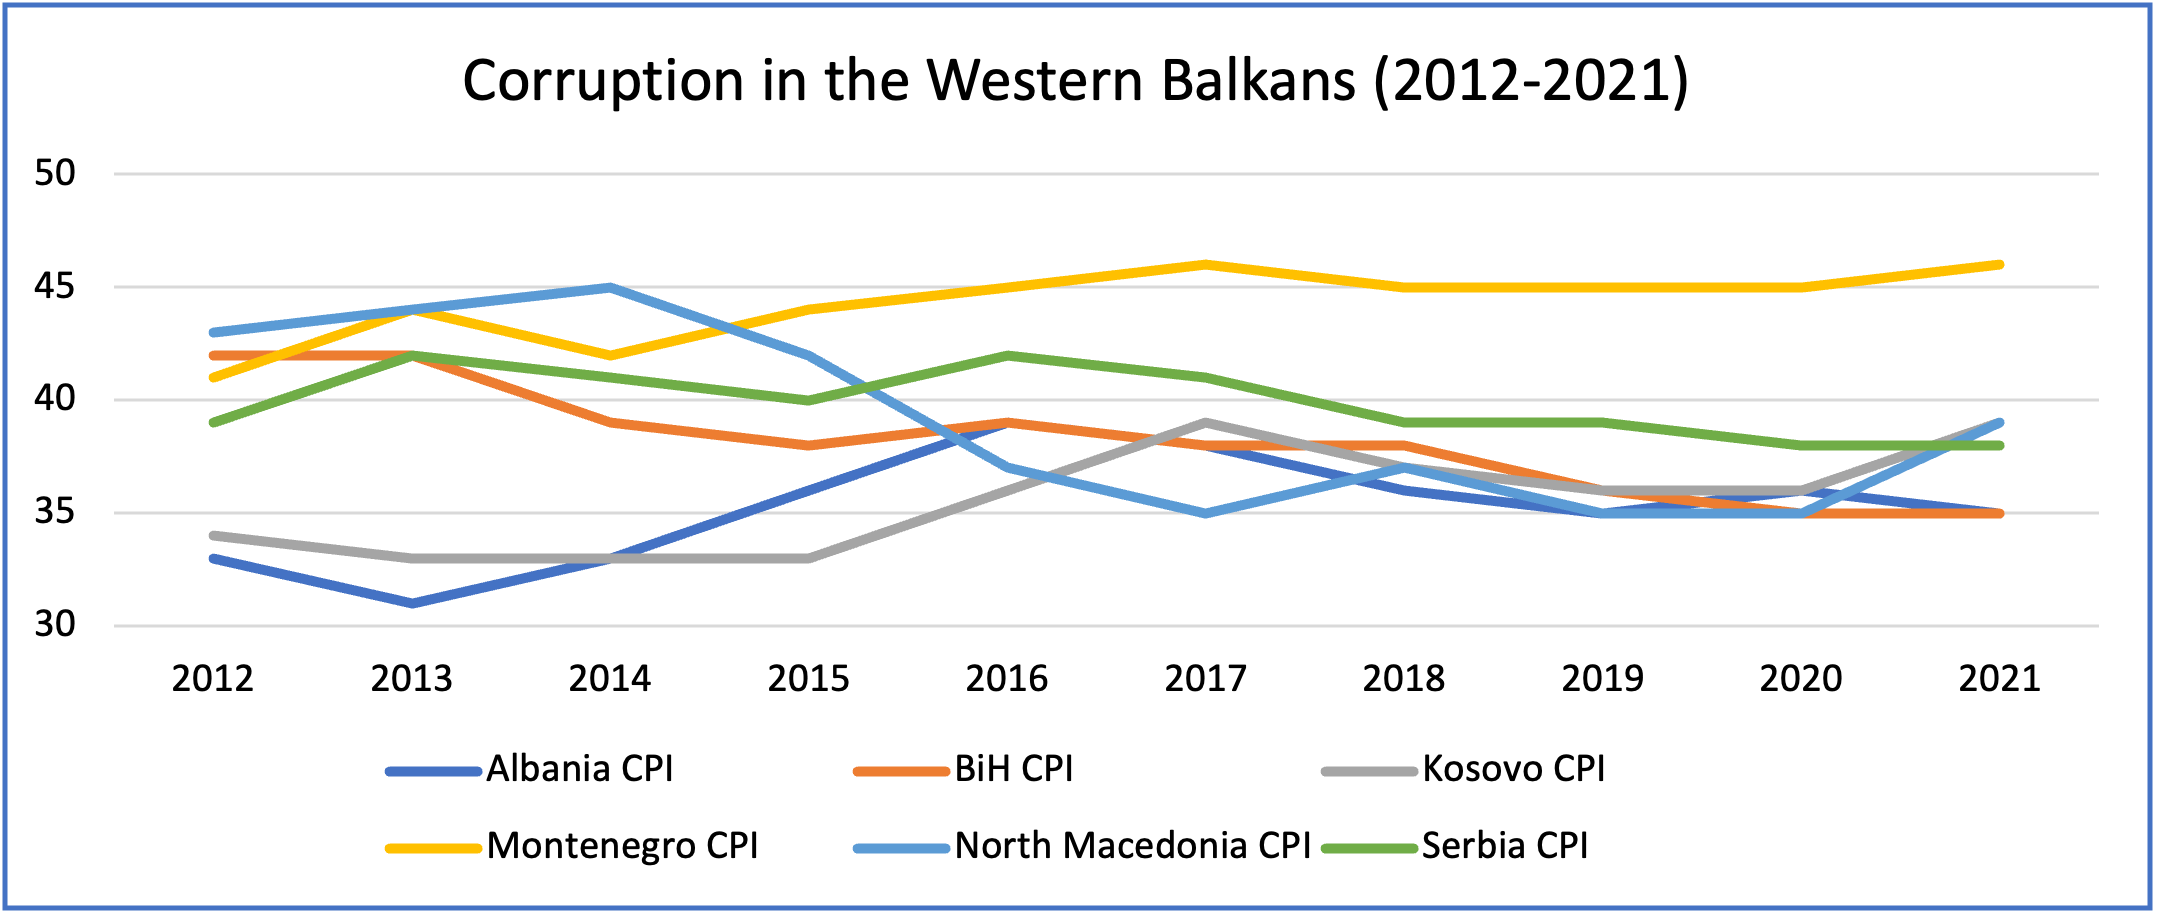 Corruption Trends in the Western Balkans, 2012-2021